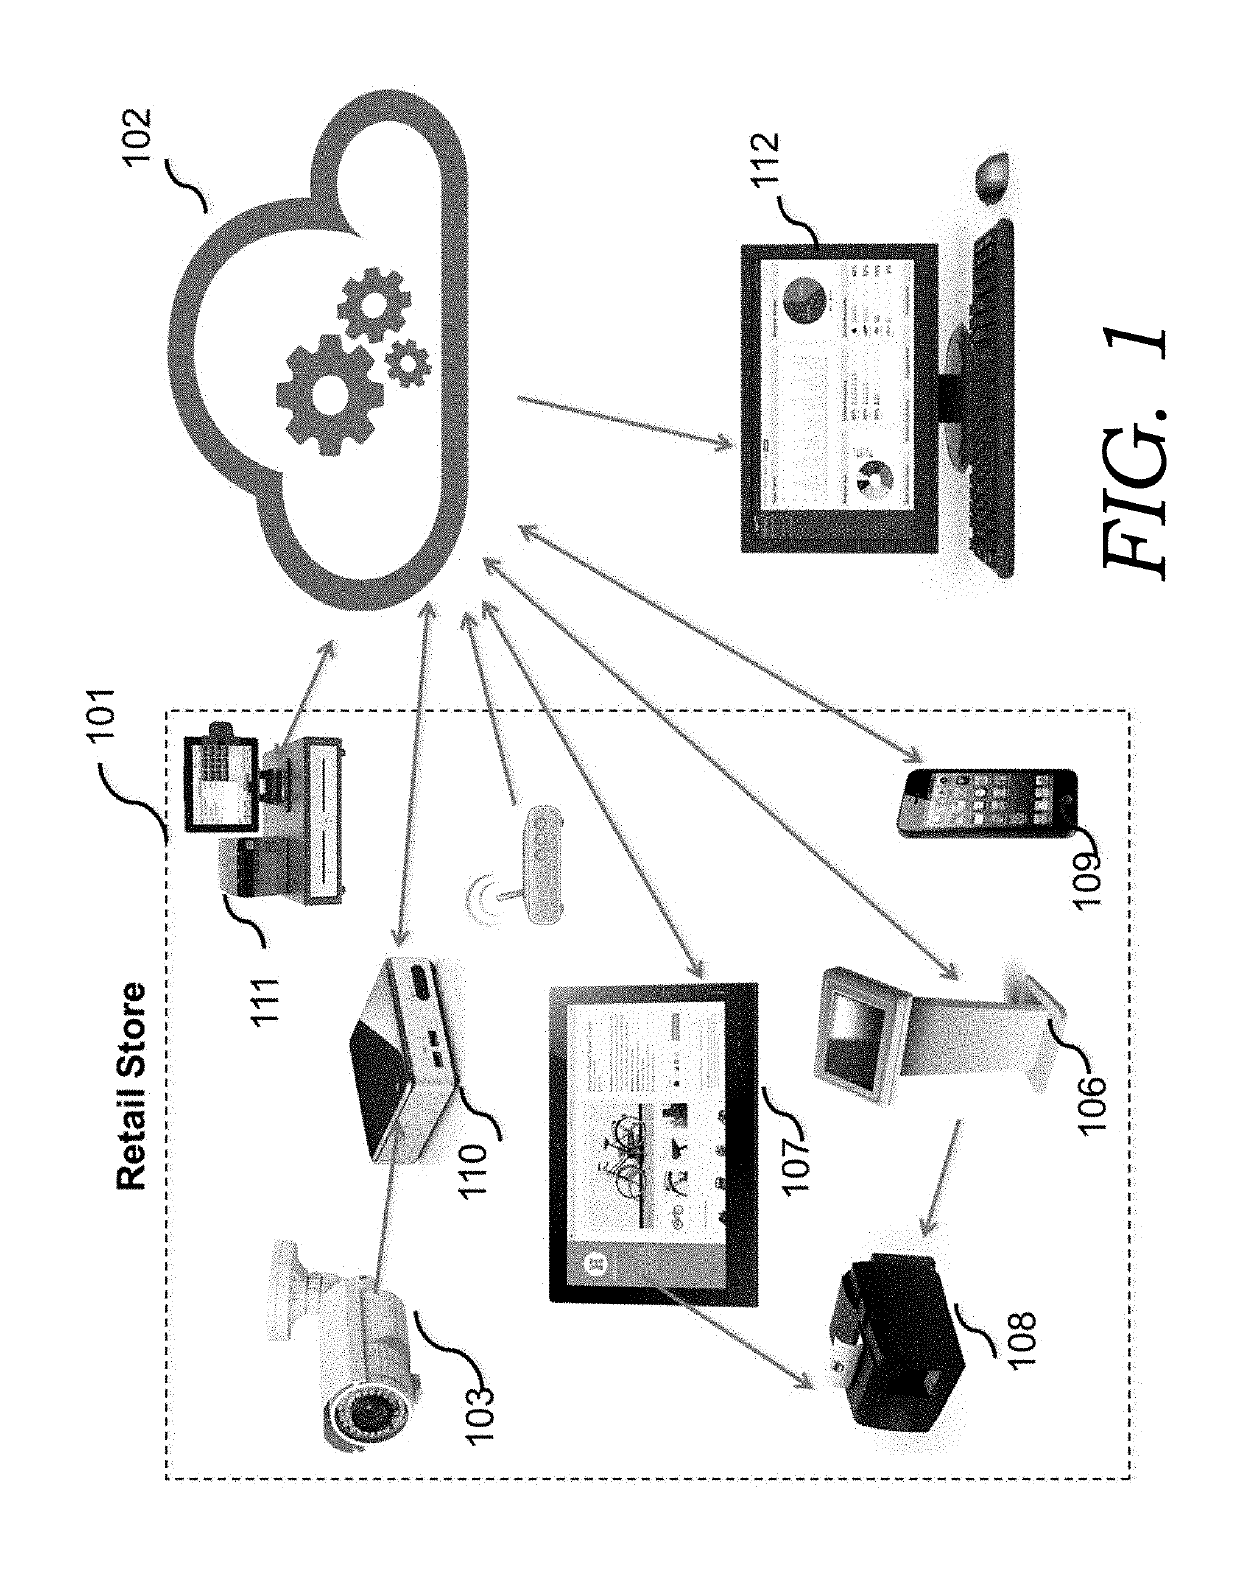 Method for monitoring and analyzing behavior and uses thereof